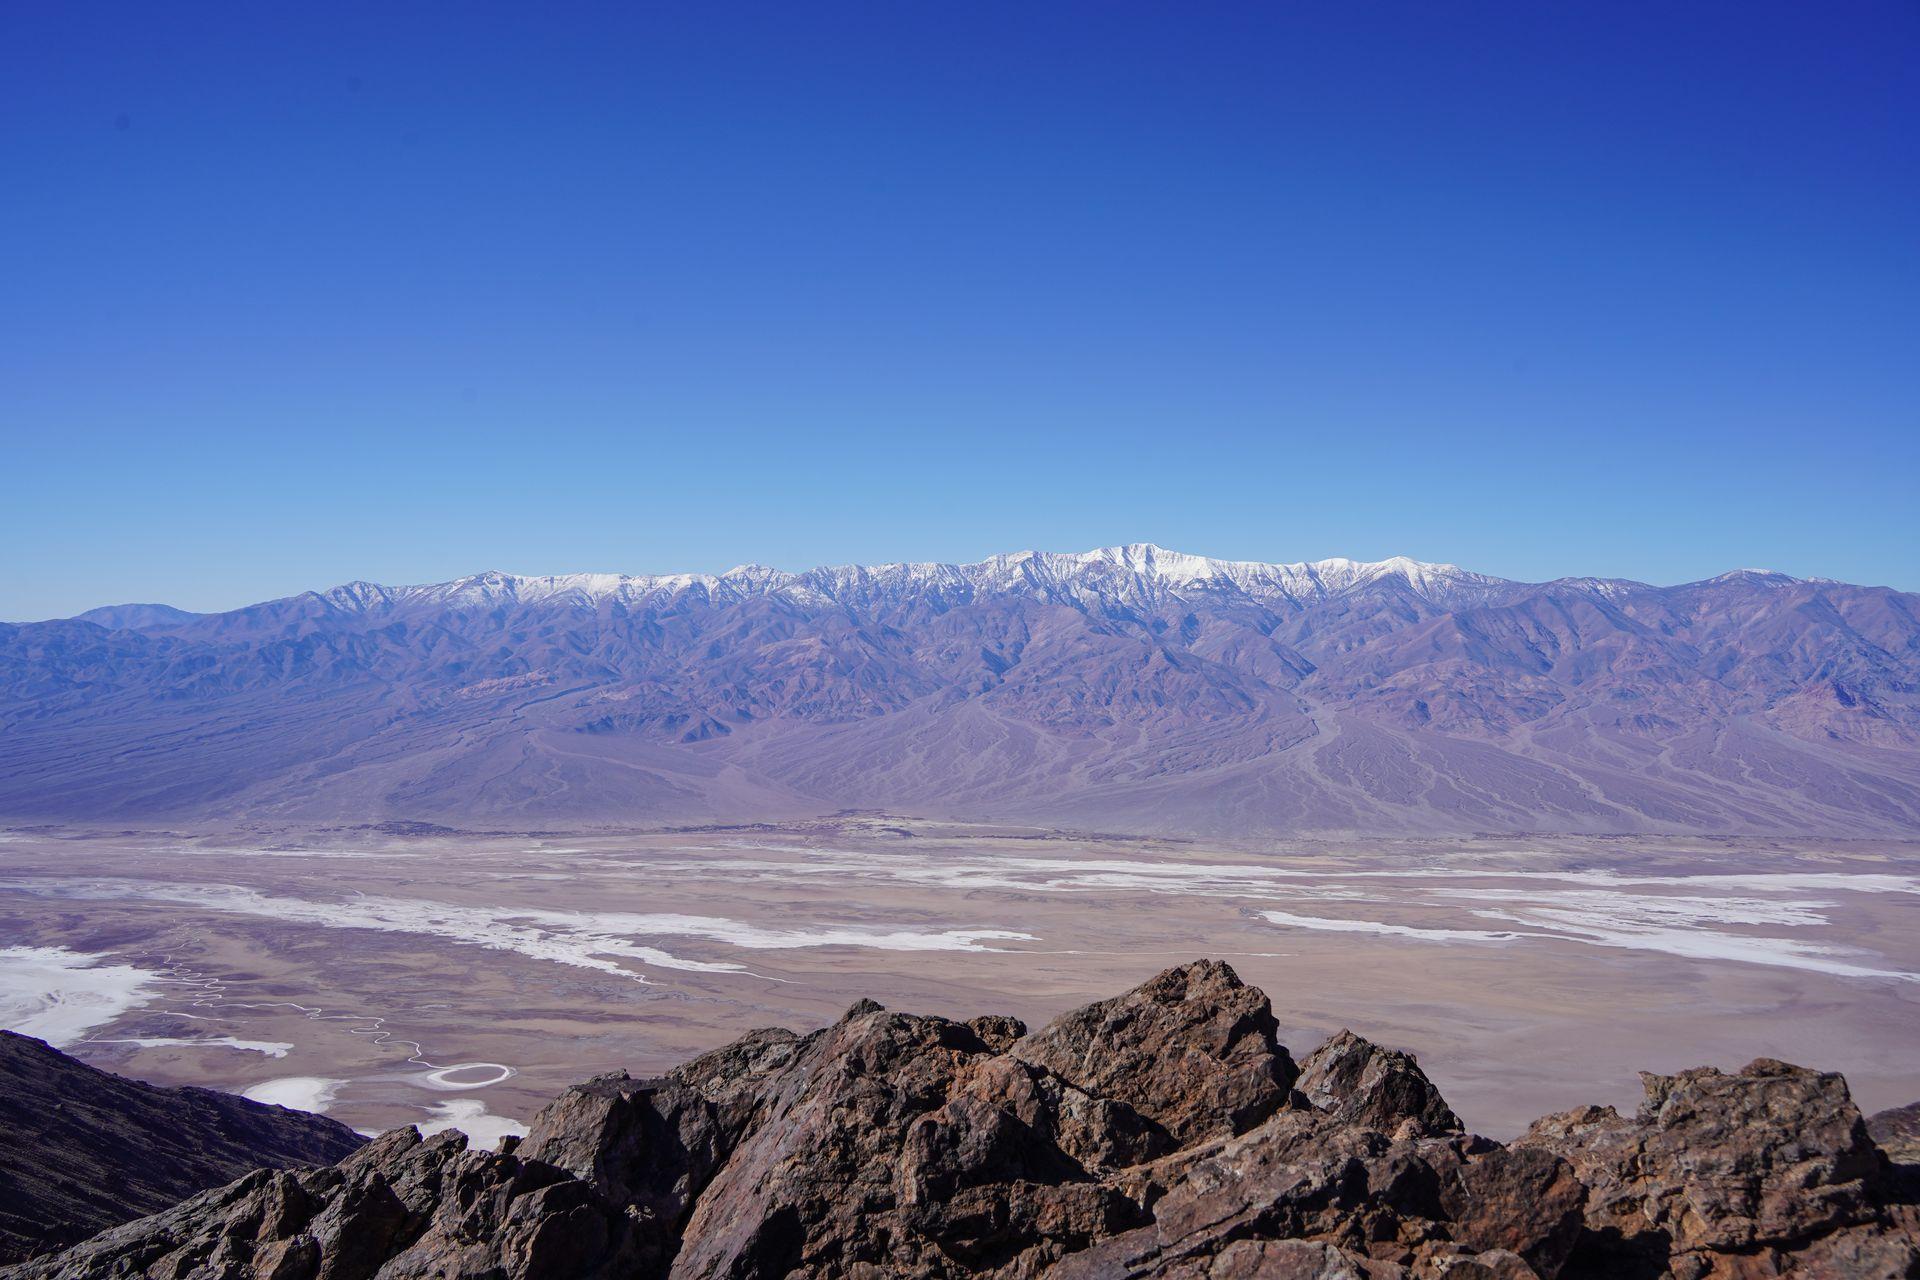 Looking down at an expansive valley full of salt flats from the Dante's View overlook. You can see mountains in the distance from the other side of the valley.